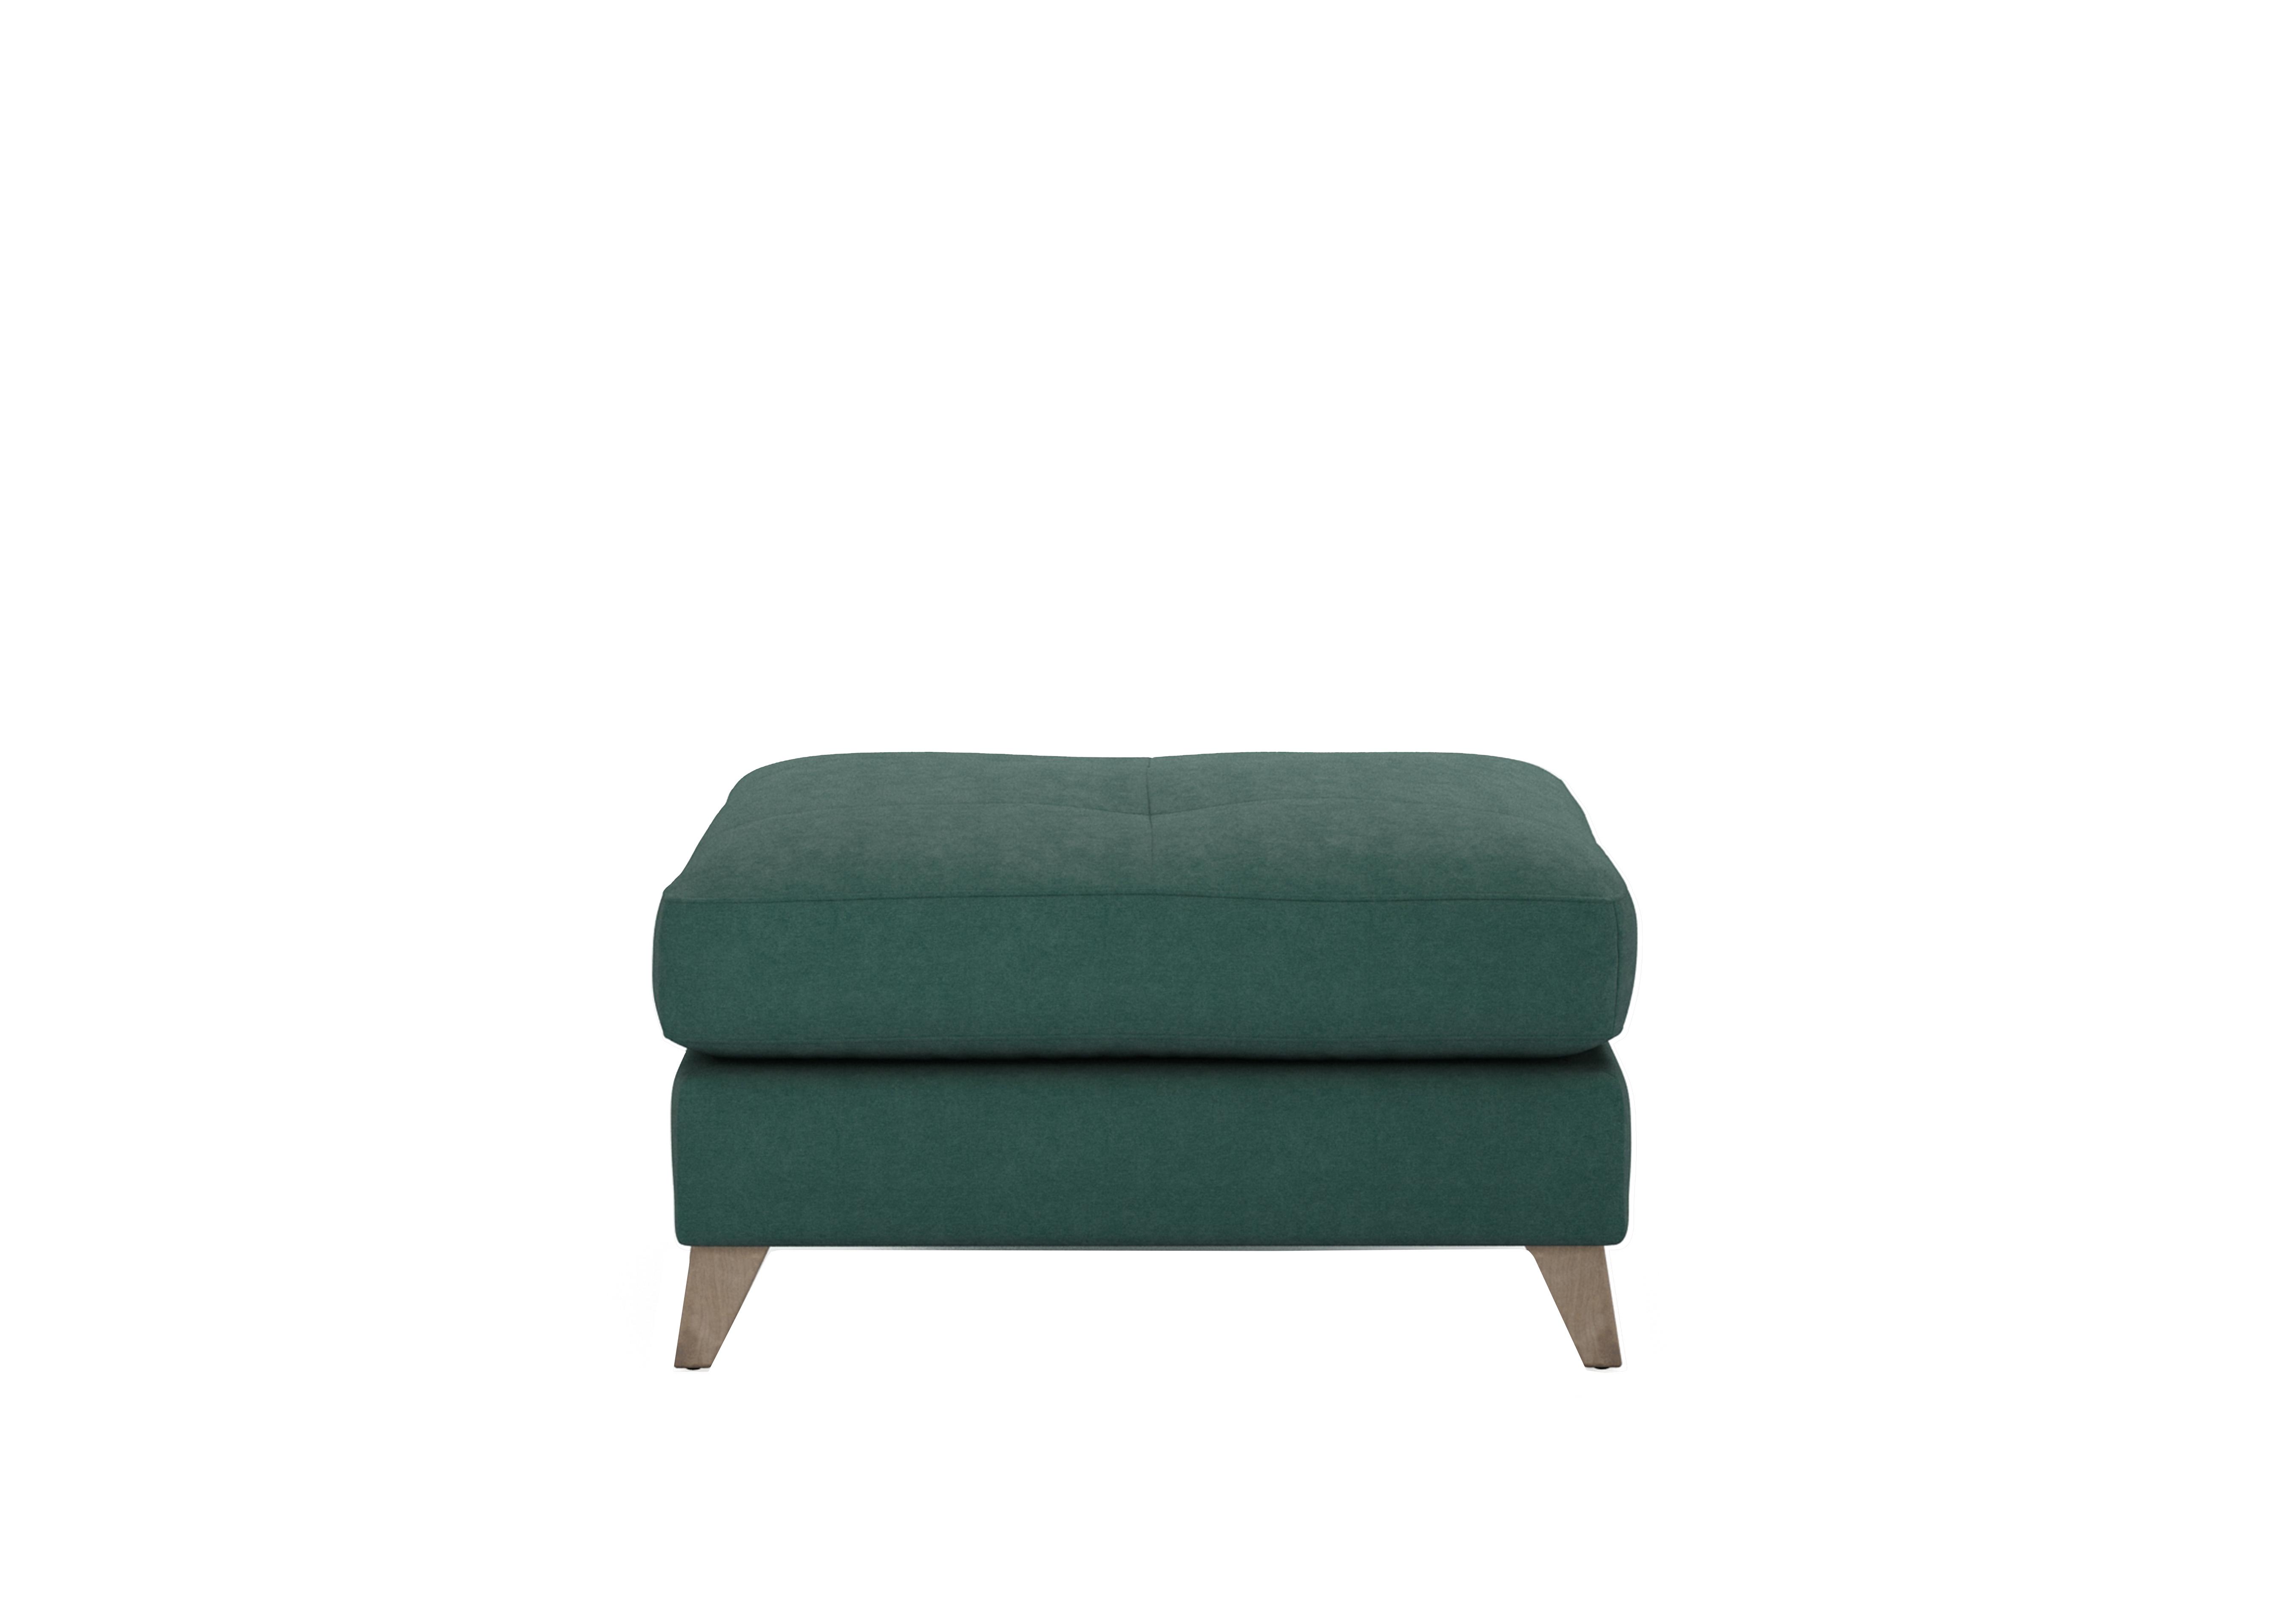 Hermione Fabric Footstool in Cur226 Curly Kale Wo Ft on Furniture Village